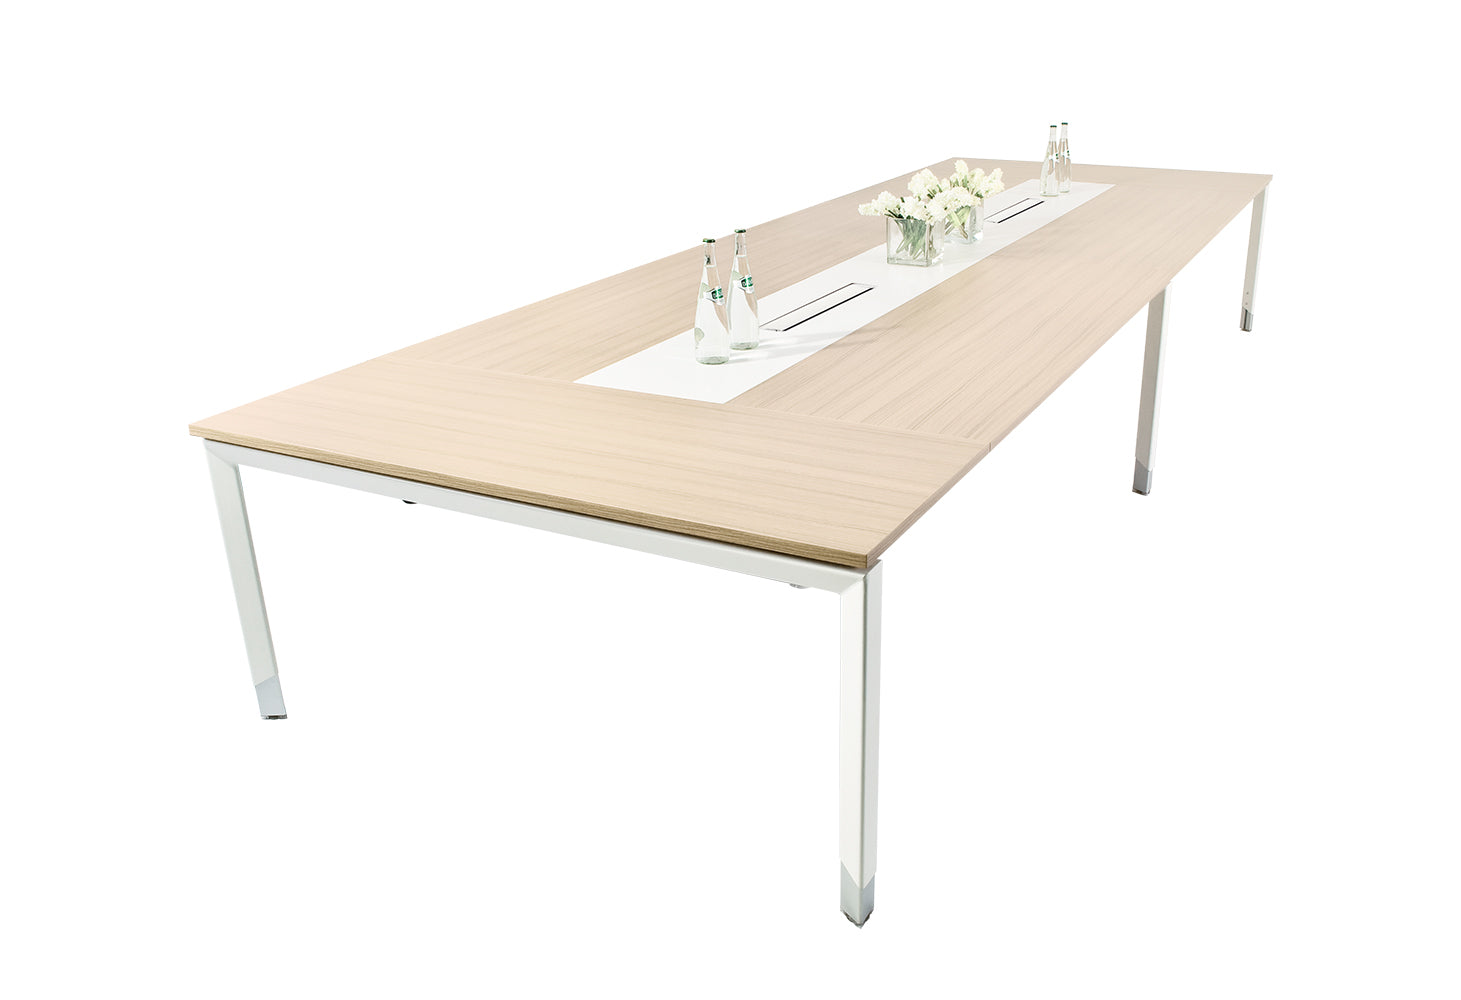 Oblique Board Room Table Soft Maple - With 2 in top power boxes  4GPO, 2USB, 2 Data